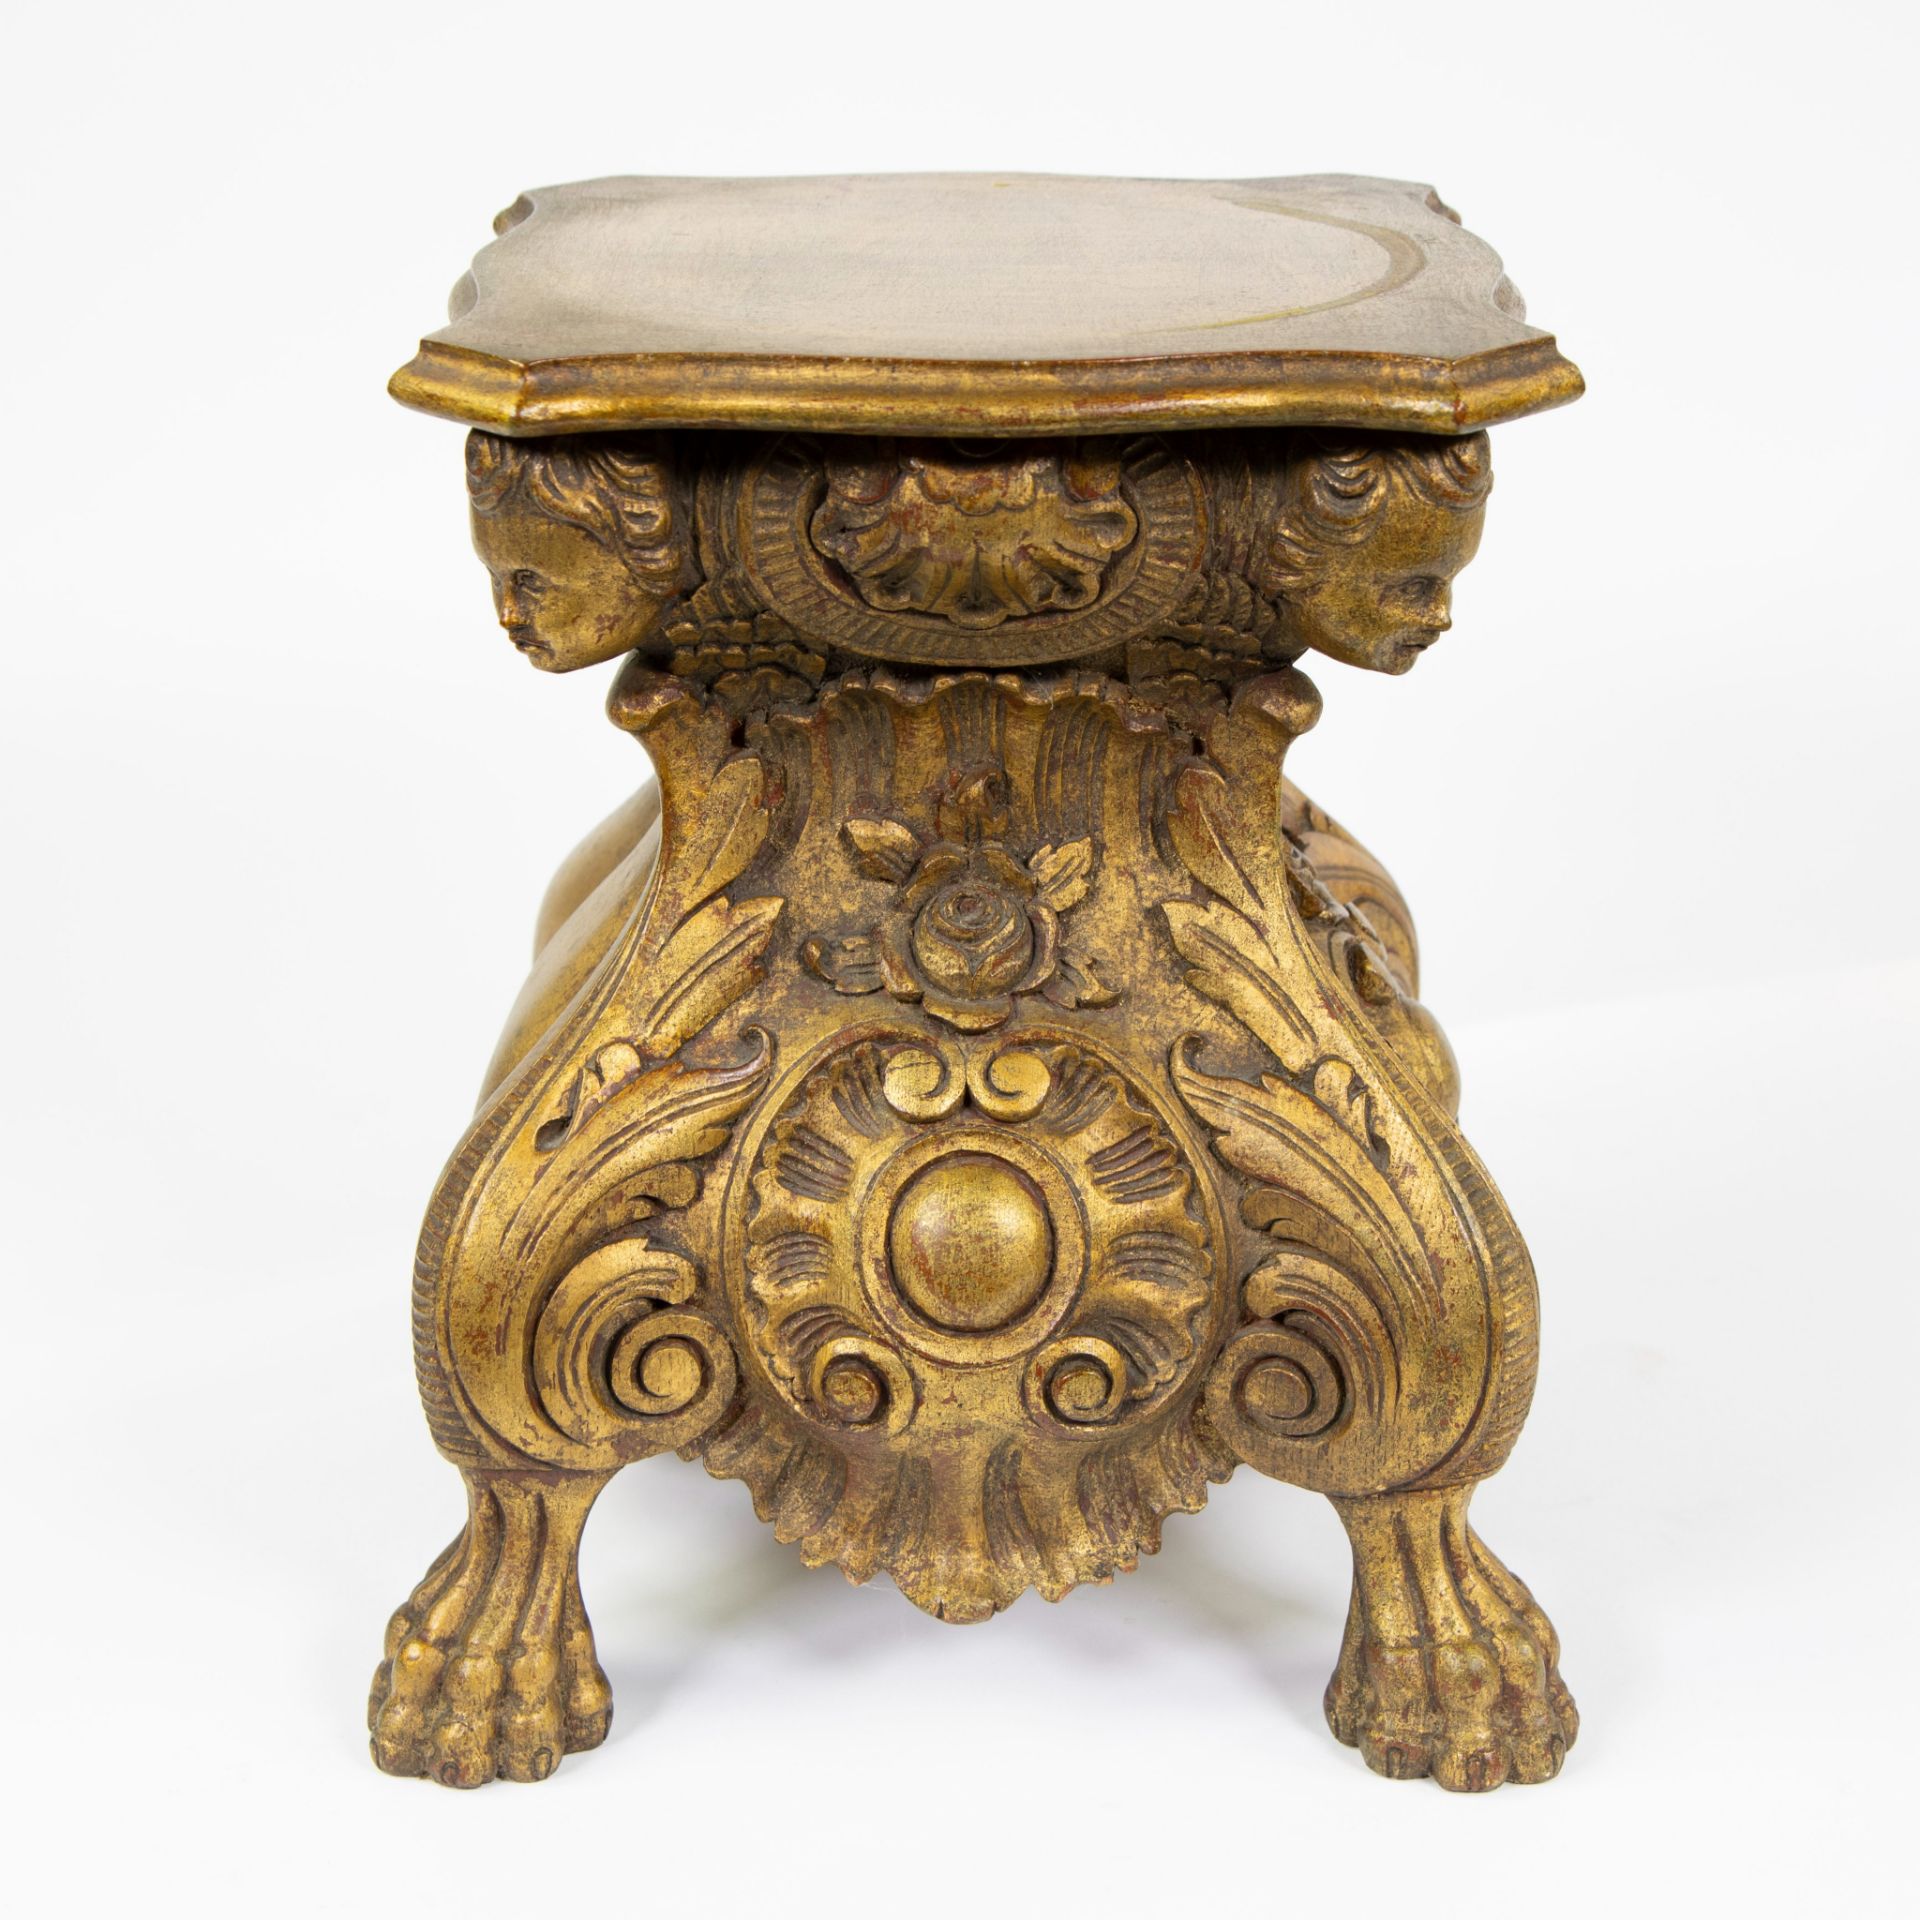 Gilded wooden pedestal with a statue of an eagle in patinated plaster, after the 18th century Italia